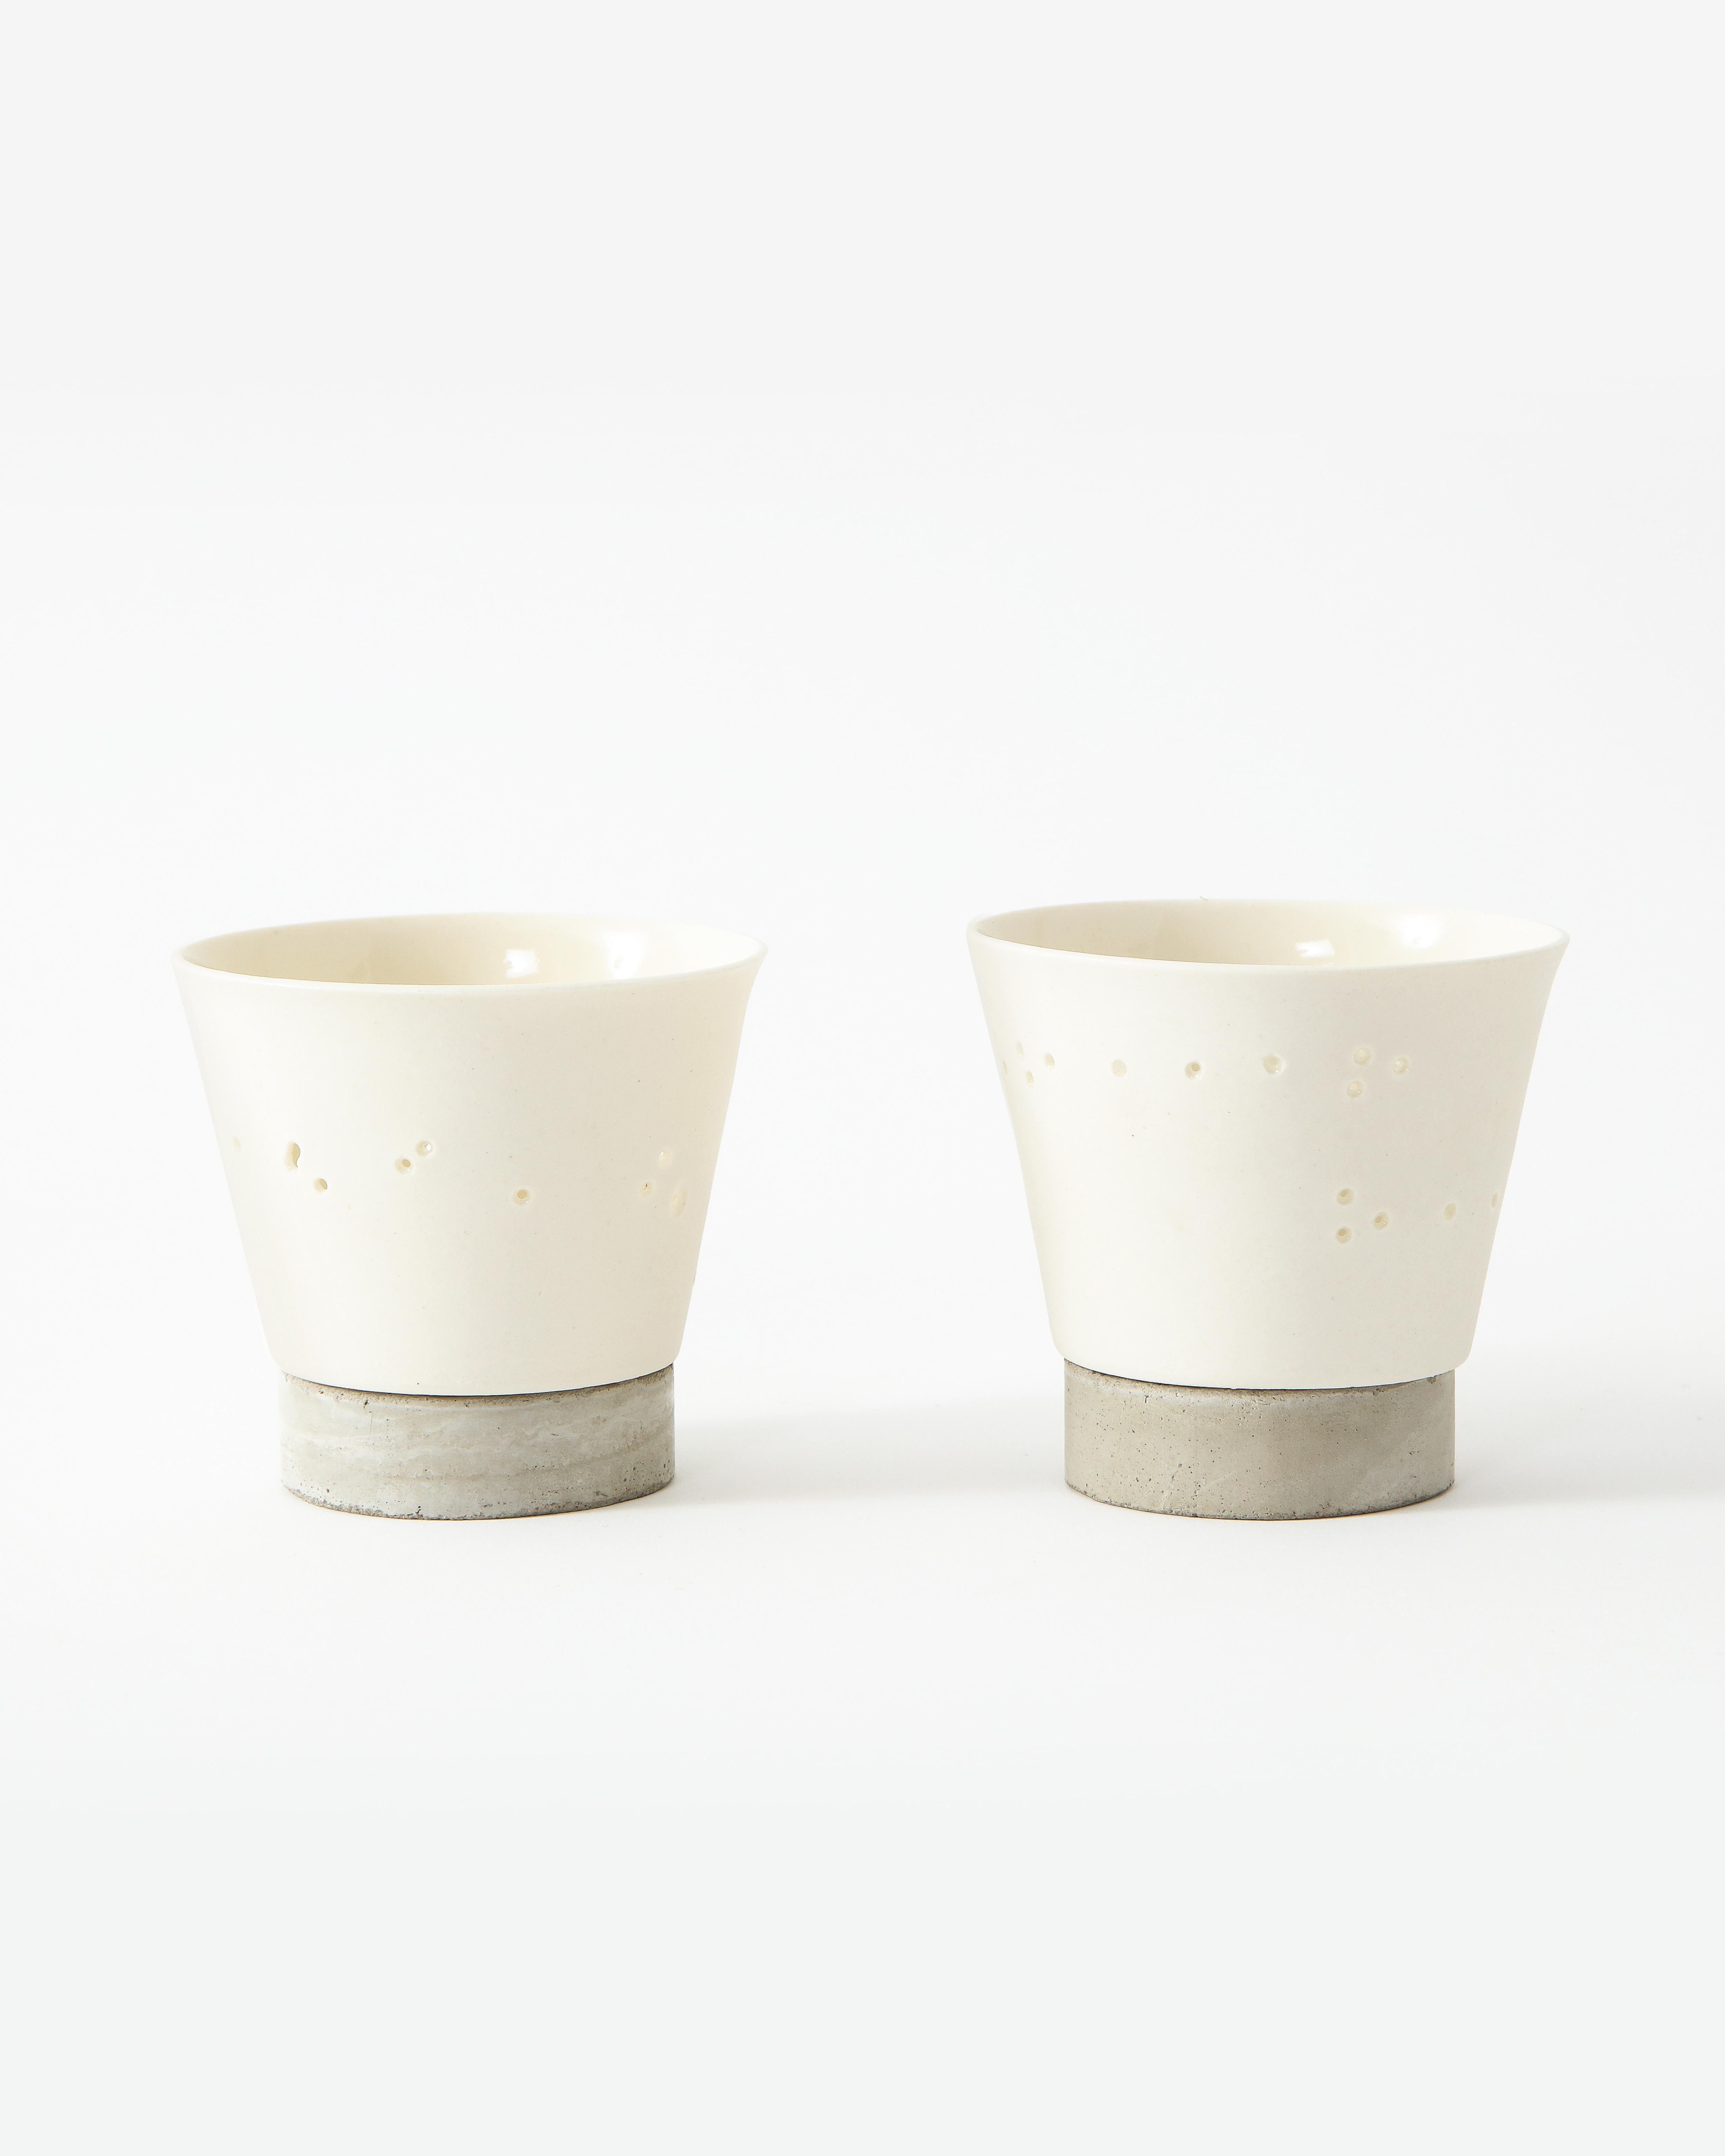 These soft white cups in thin ceramic are enhanced with small piercings that form a seemingly haphazard yet elegant design. Concrete bases finish off the bottom of the work.